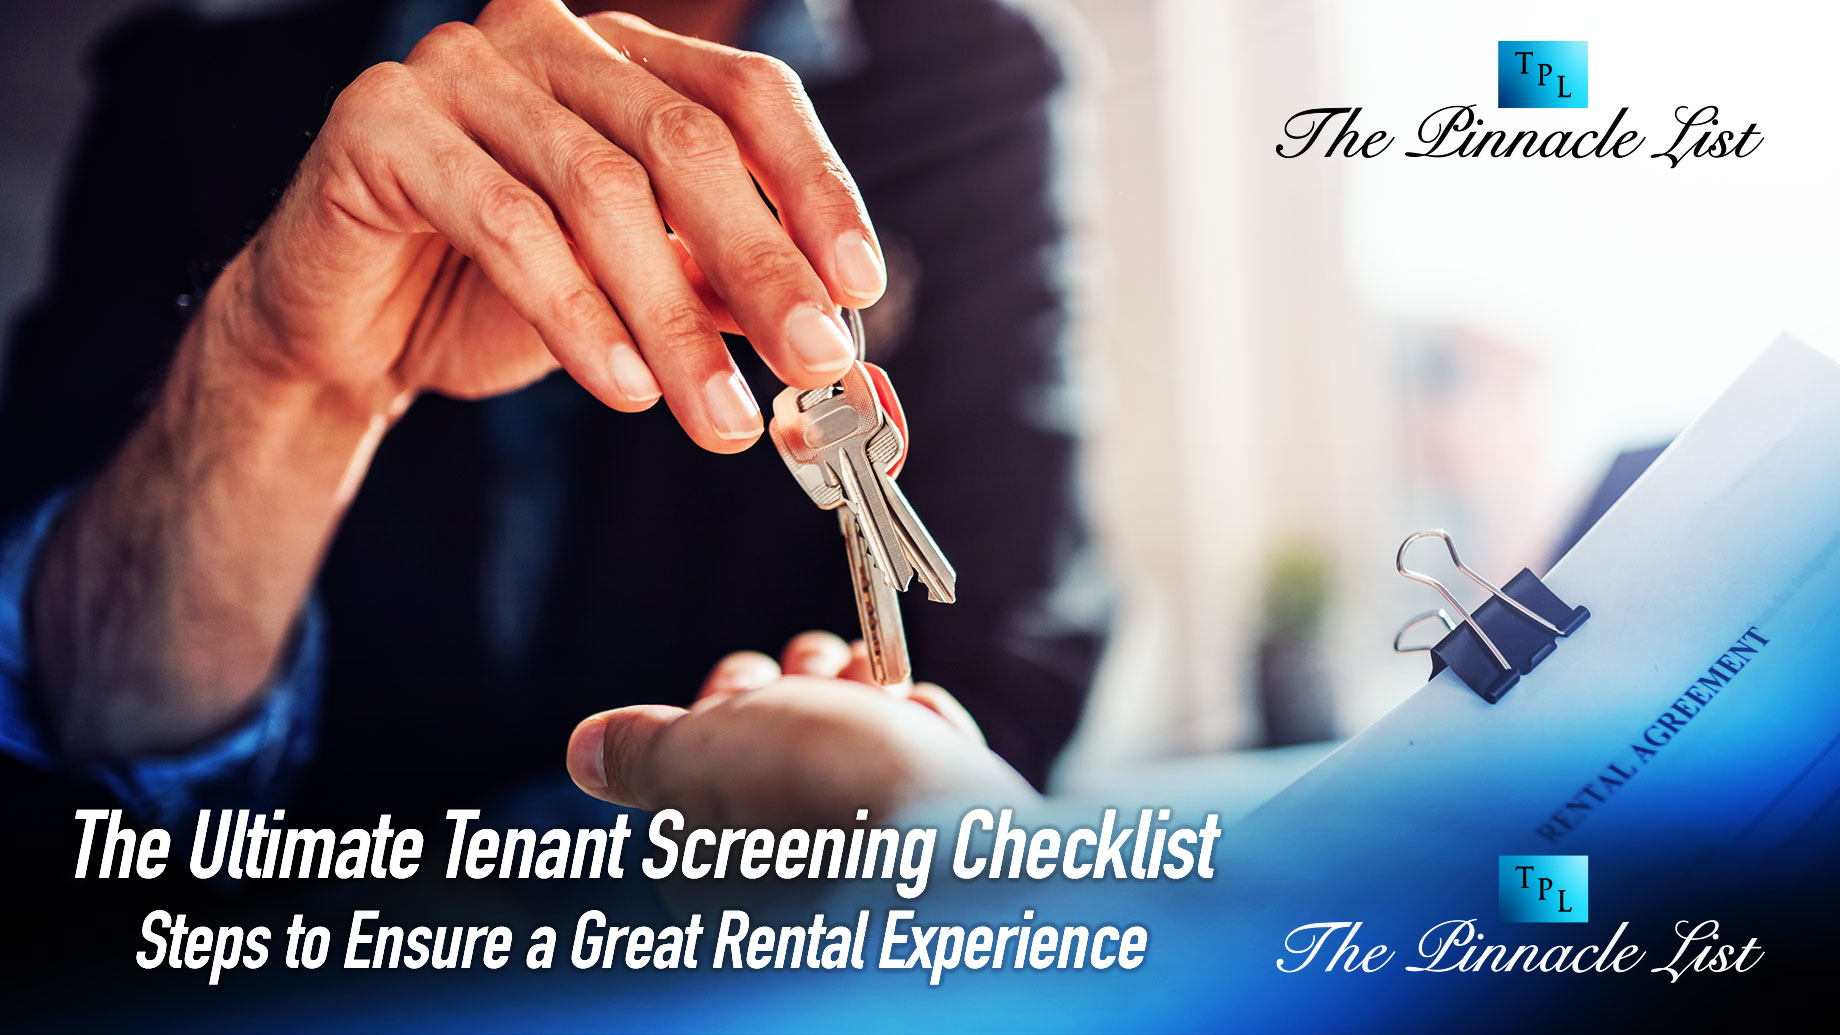 The Ultimate Tenant Screening Checklist: Steps to Ensure a Great Rental Experience